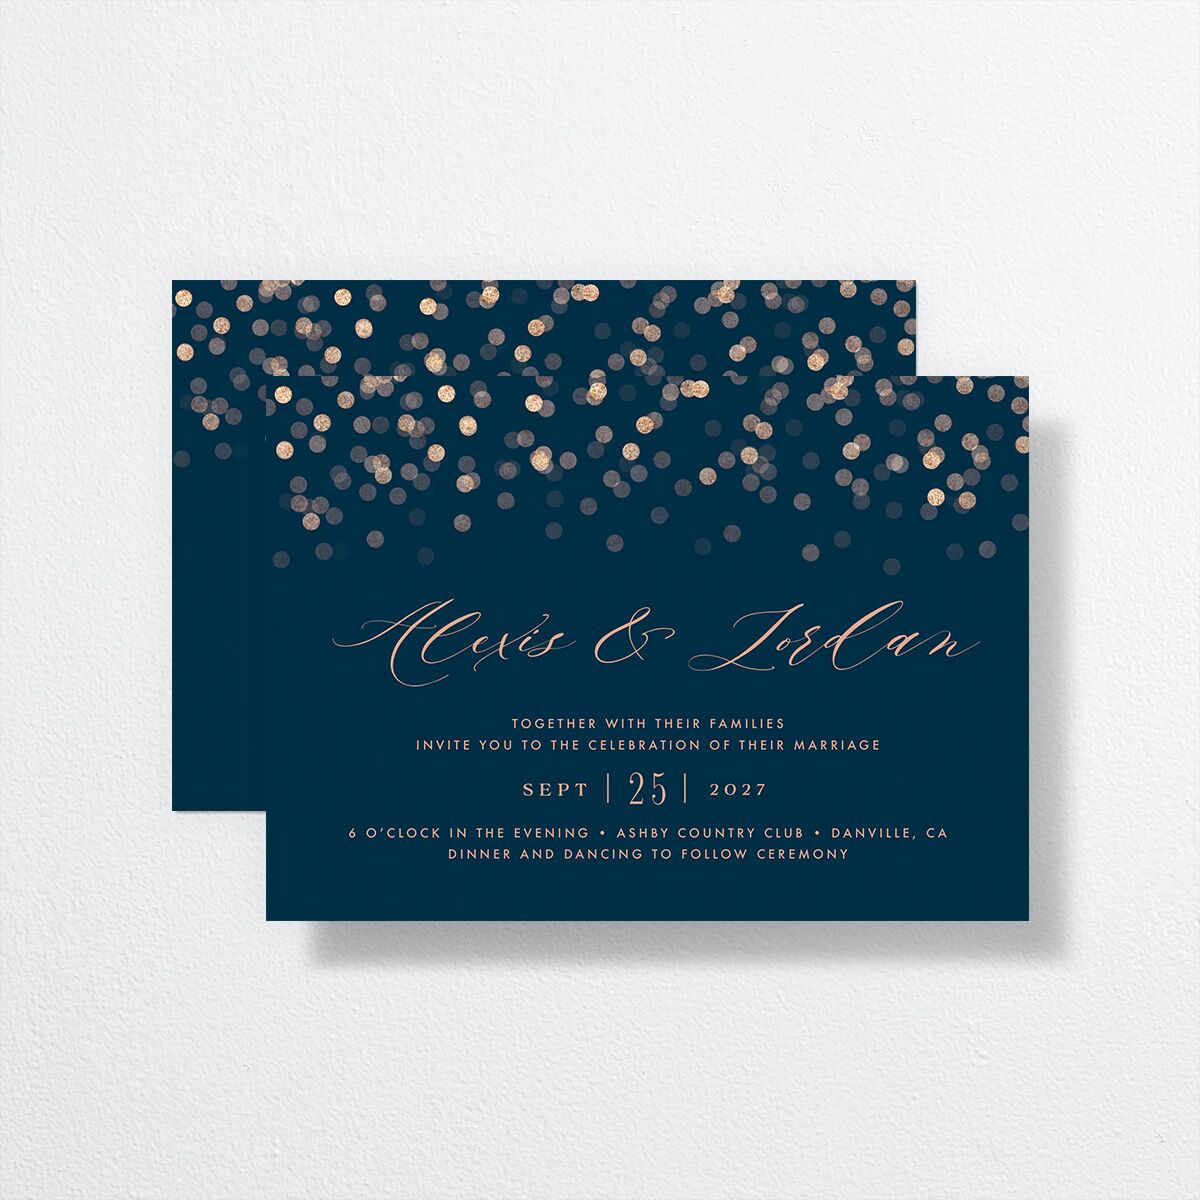 Elegant Glow Wedding Invitations front-and-back in blue